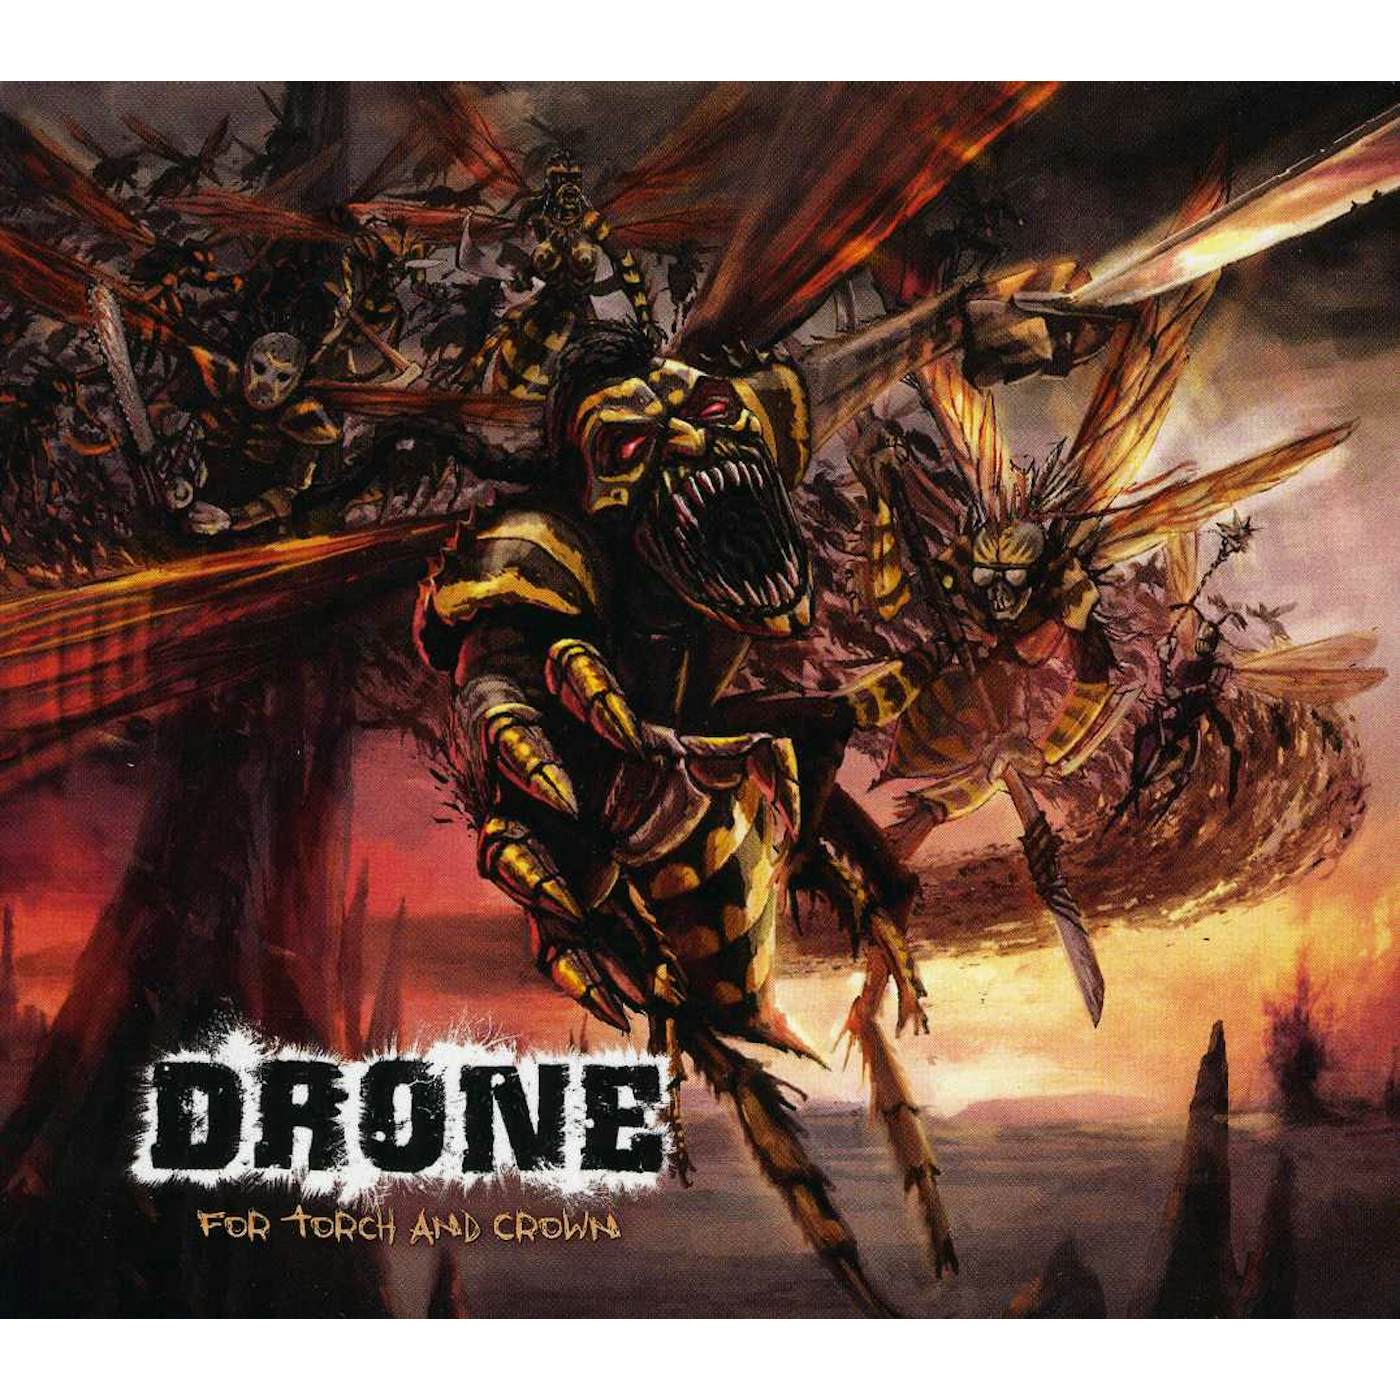 Drone FOR TORCH & CROWN CD